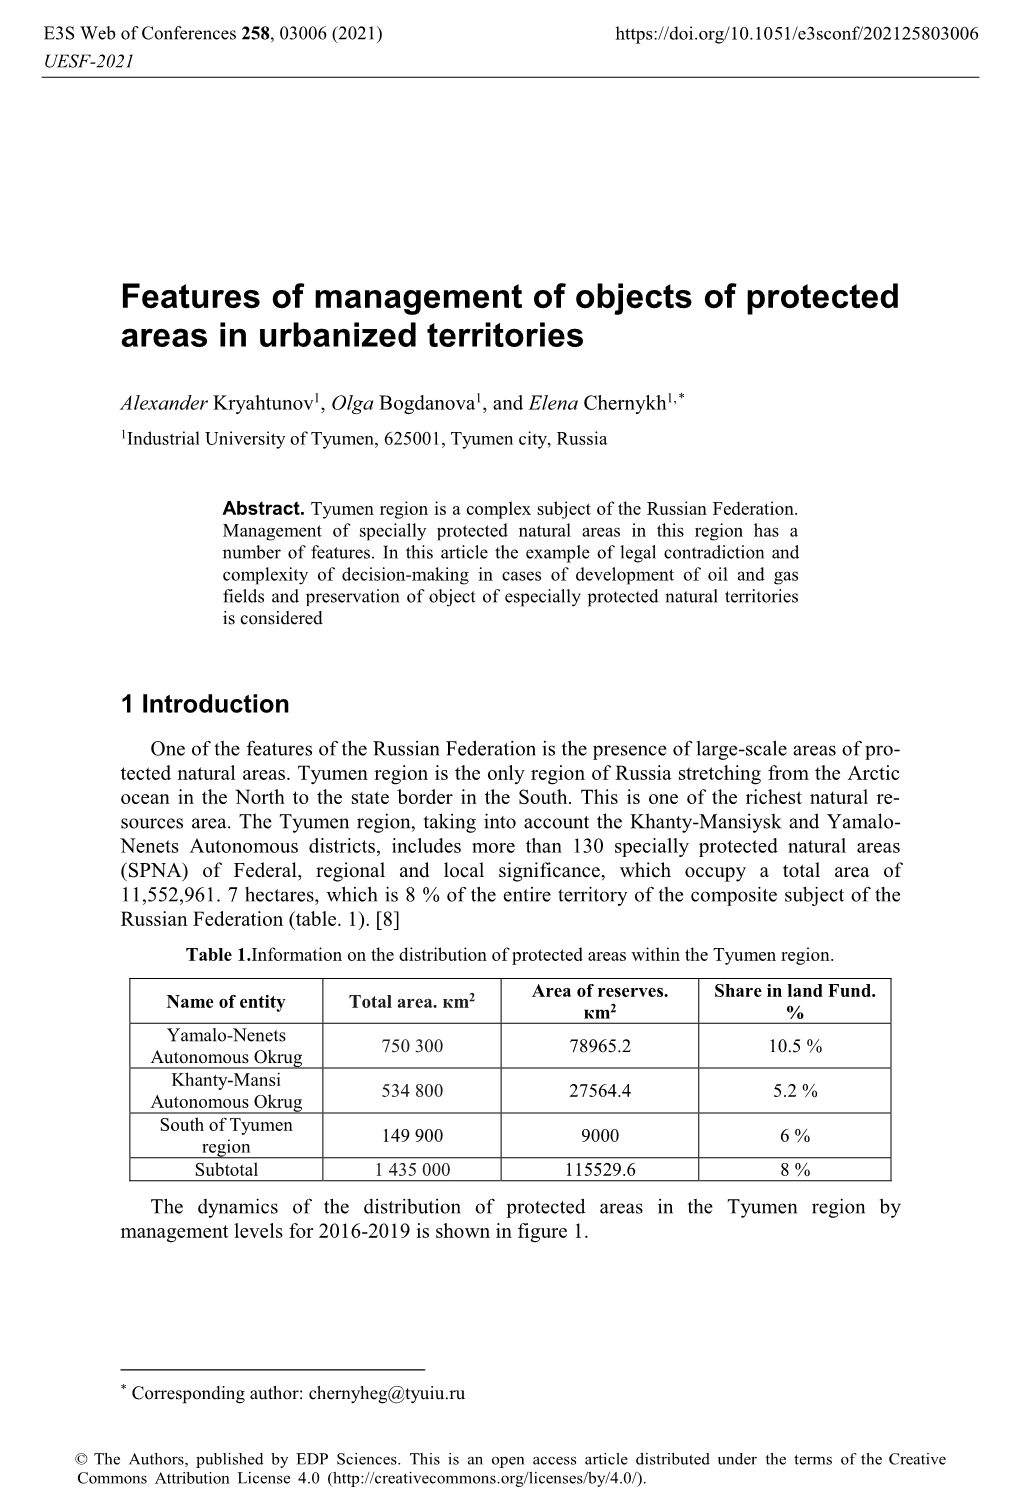 Features of Management of Objects of Protected Areas in Urbanized Territories